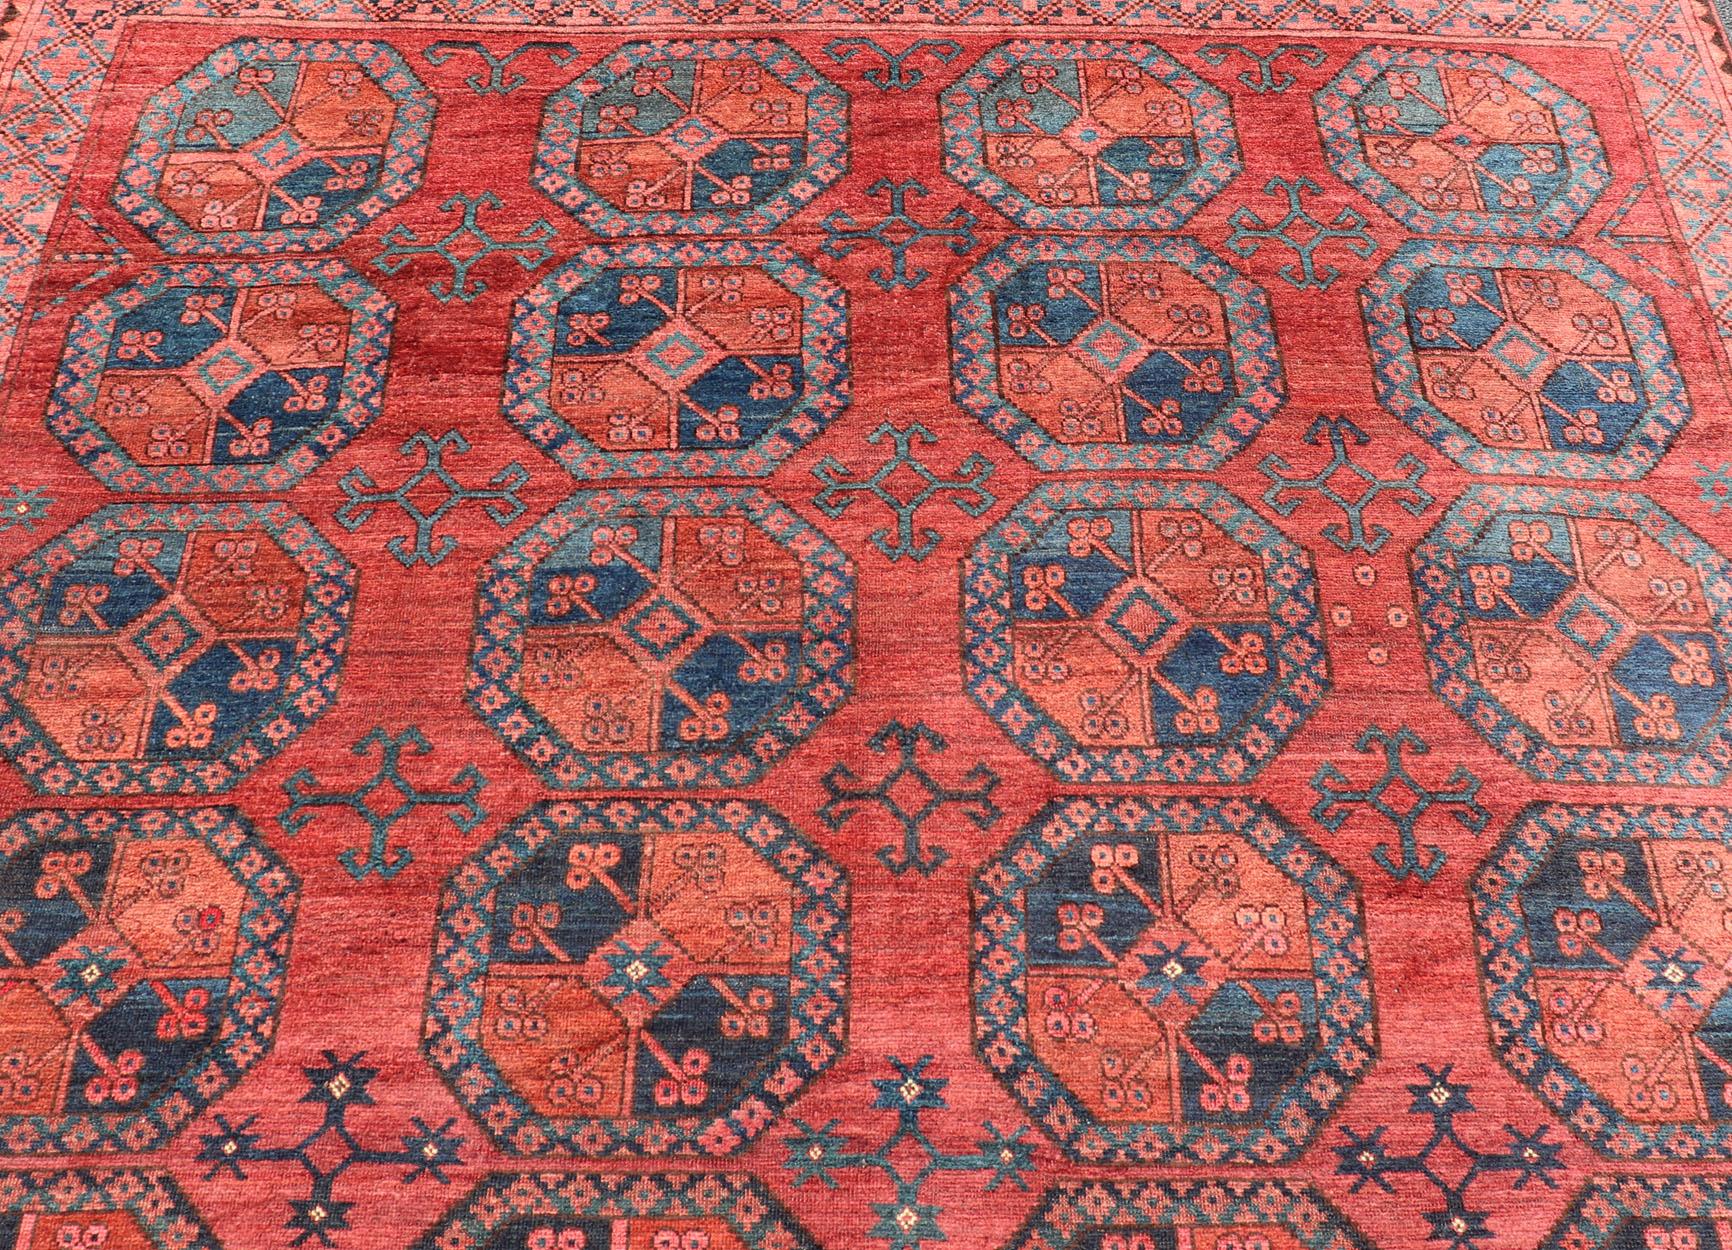 Hand-Knotted Turkomen Ersari Rug in Wool with Gul Design in Red, Orange and Blue In Good Condition For Sale In Atlanta, GA